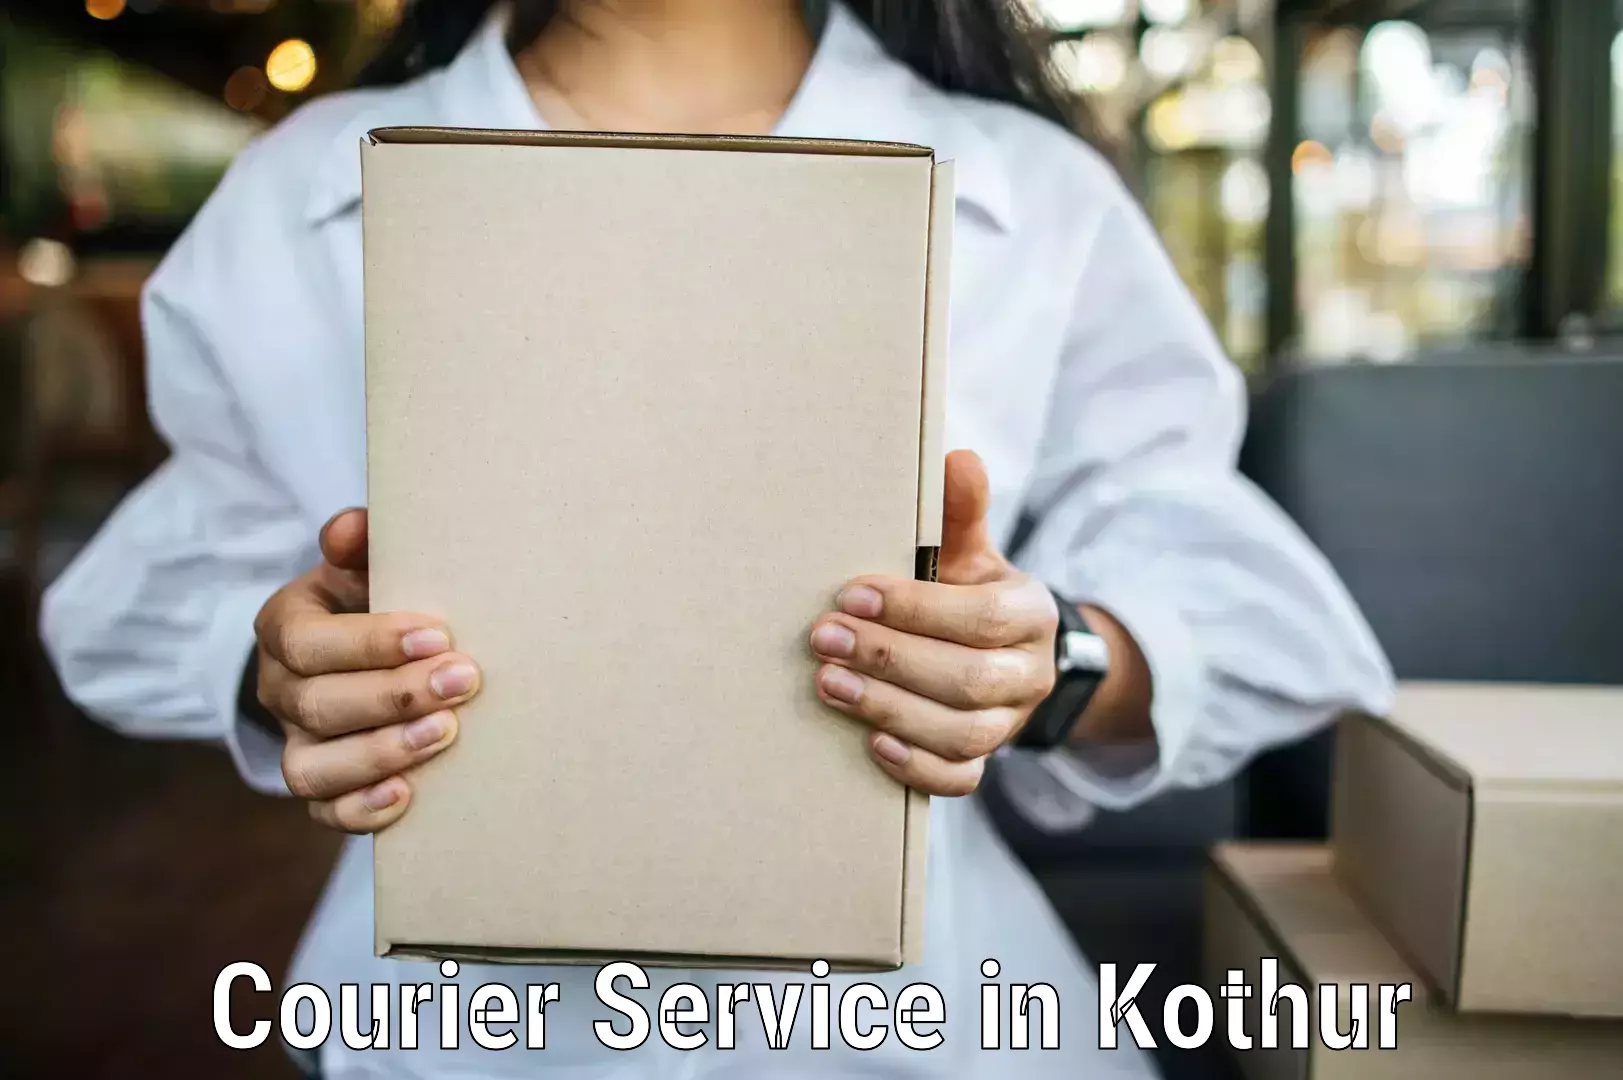 Personal courier services in Kothur